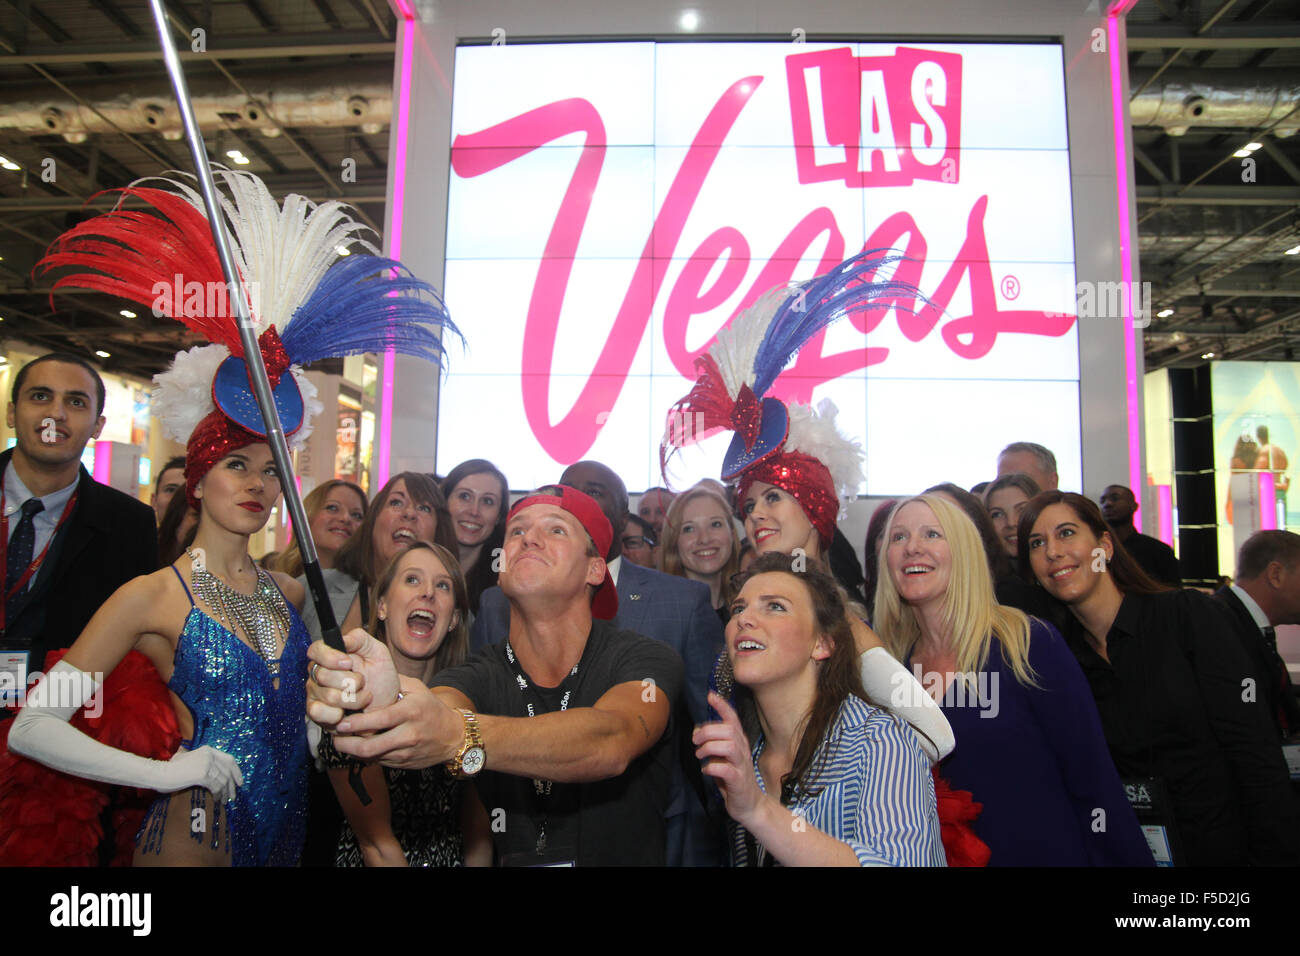 London, UK 2 November 2015. Made In Chelsea's Jamie Laing poses with members of the Las Vegad exhibition stand for a selfie photoshoot at the World Travel Market 2015. Credit:  david mbiyu/Alamy Live News Stock Photo